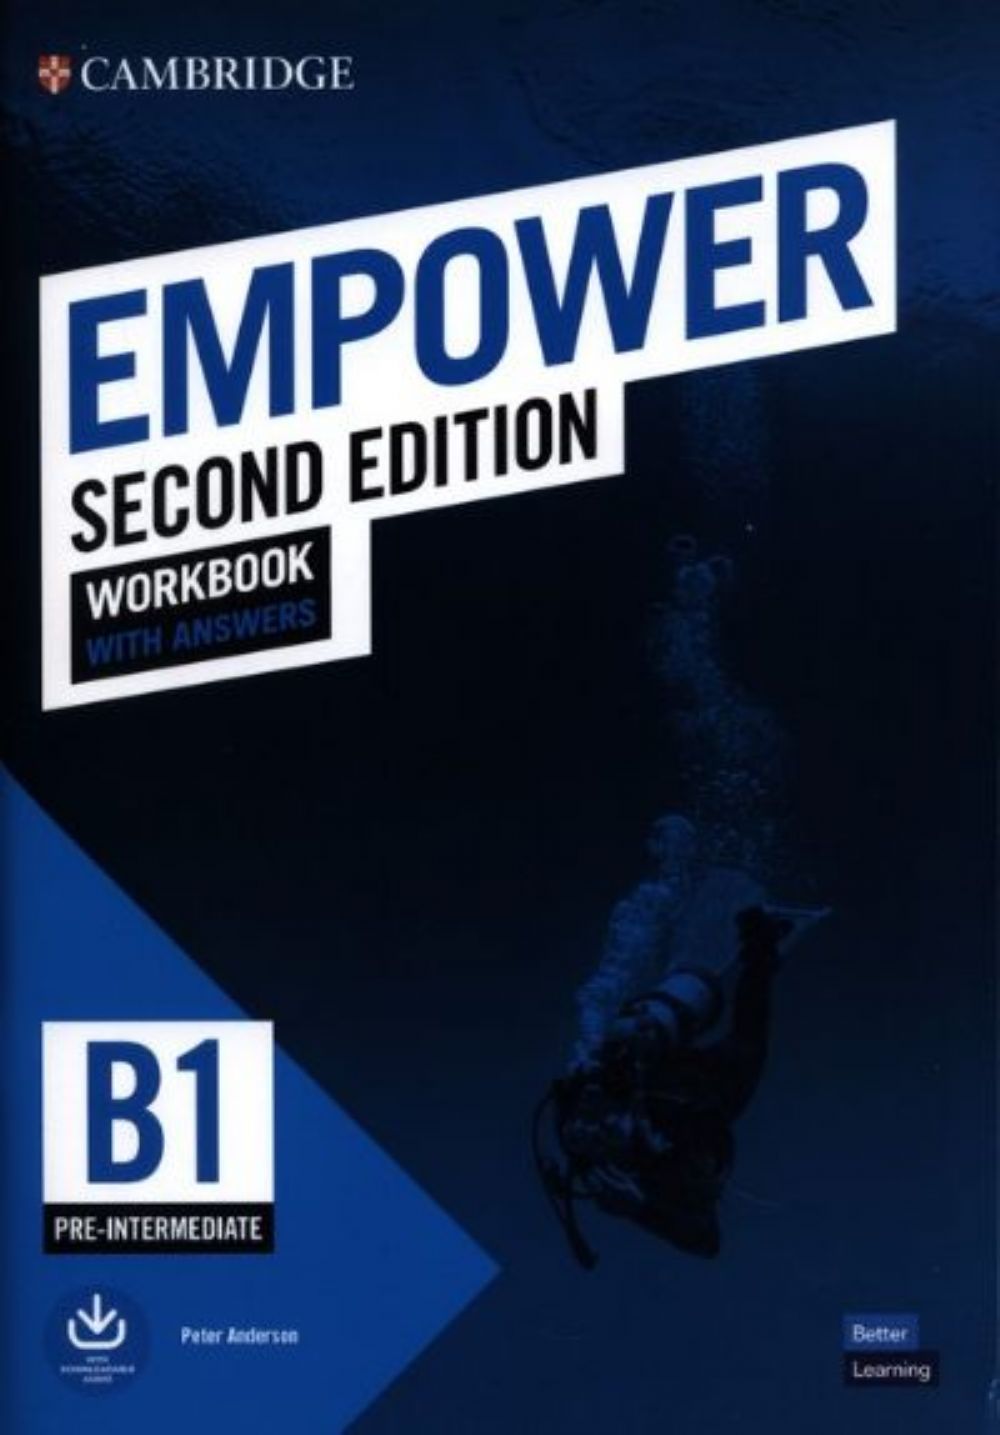 EMPOWER B1 WORKBOOK WITH ANSWERS